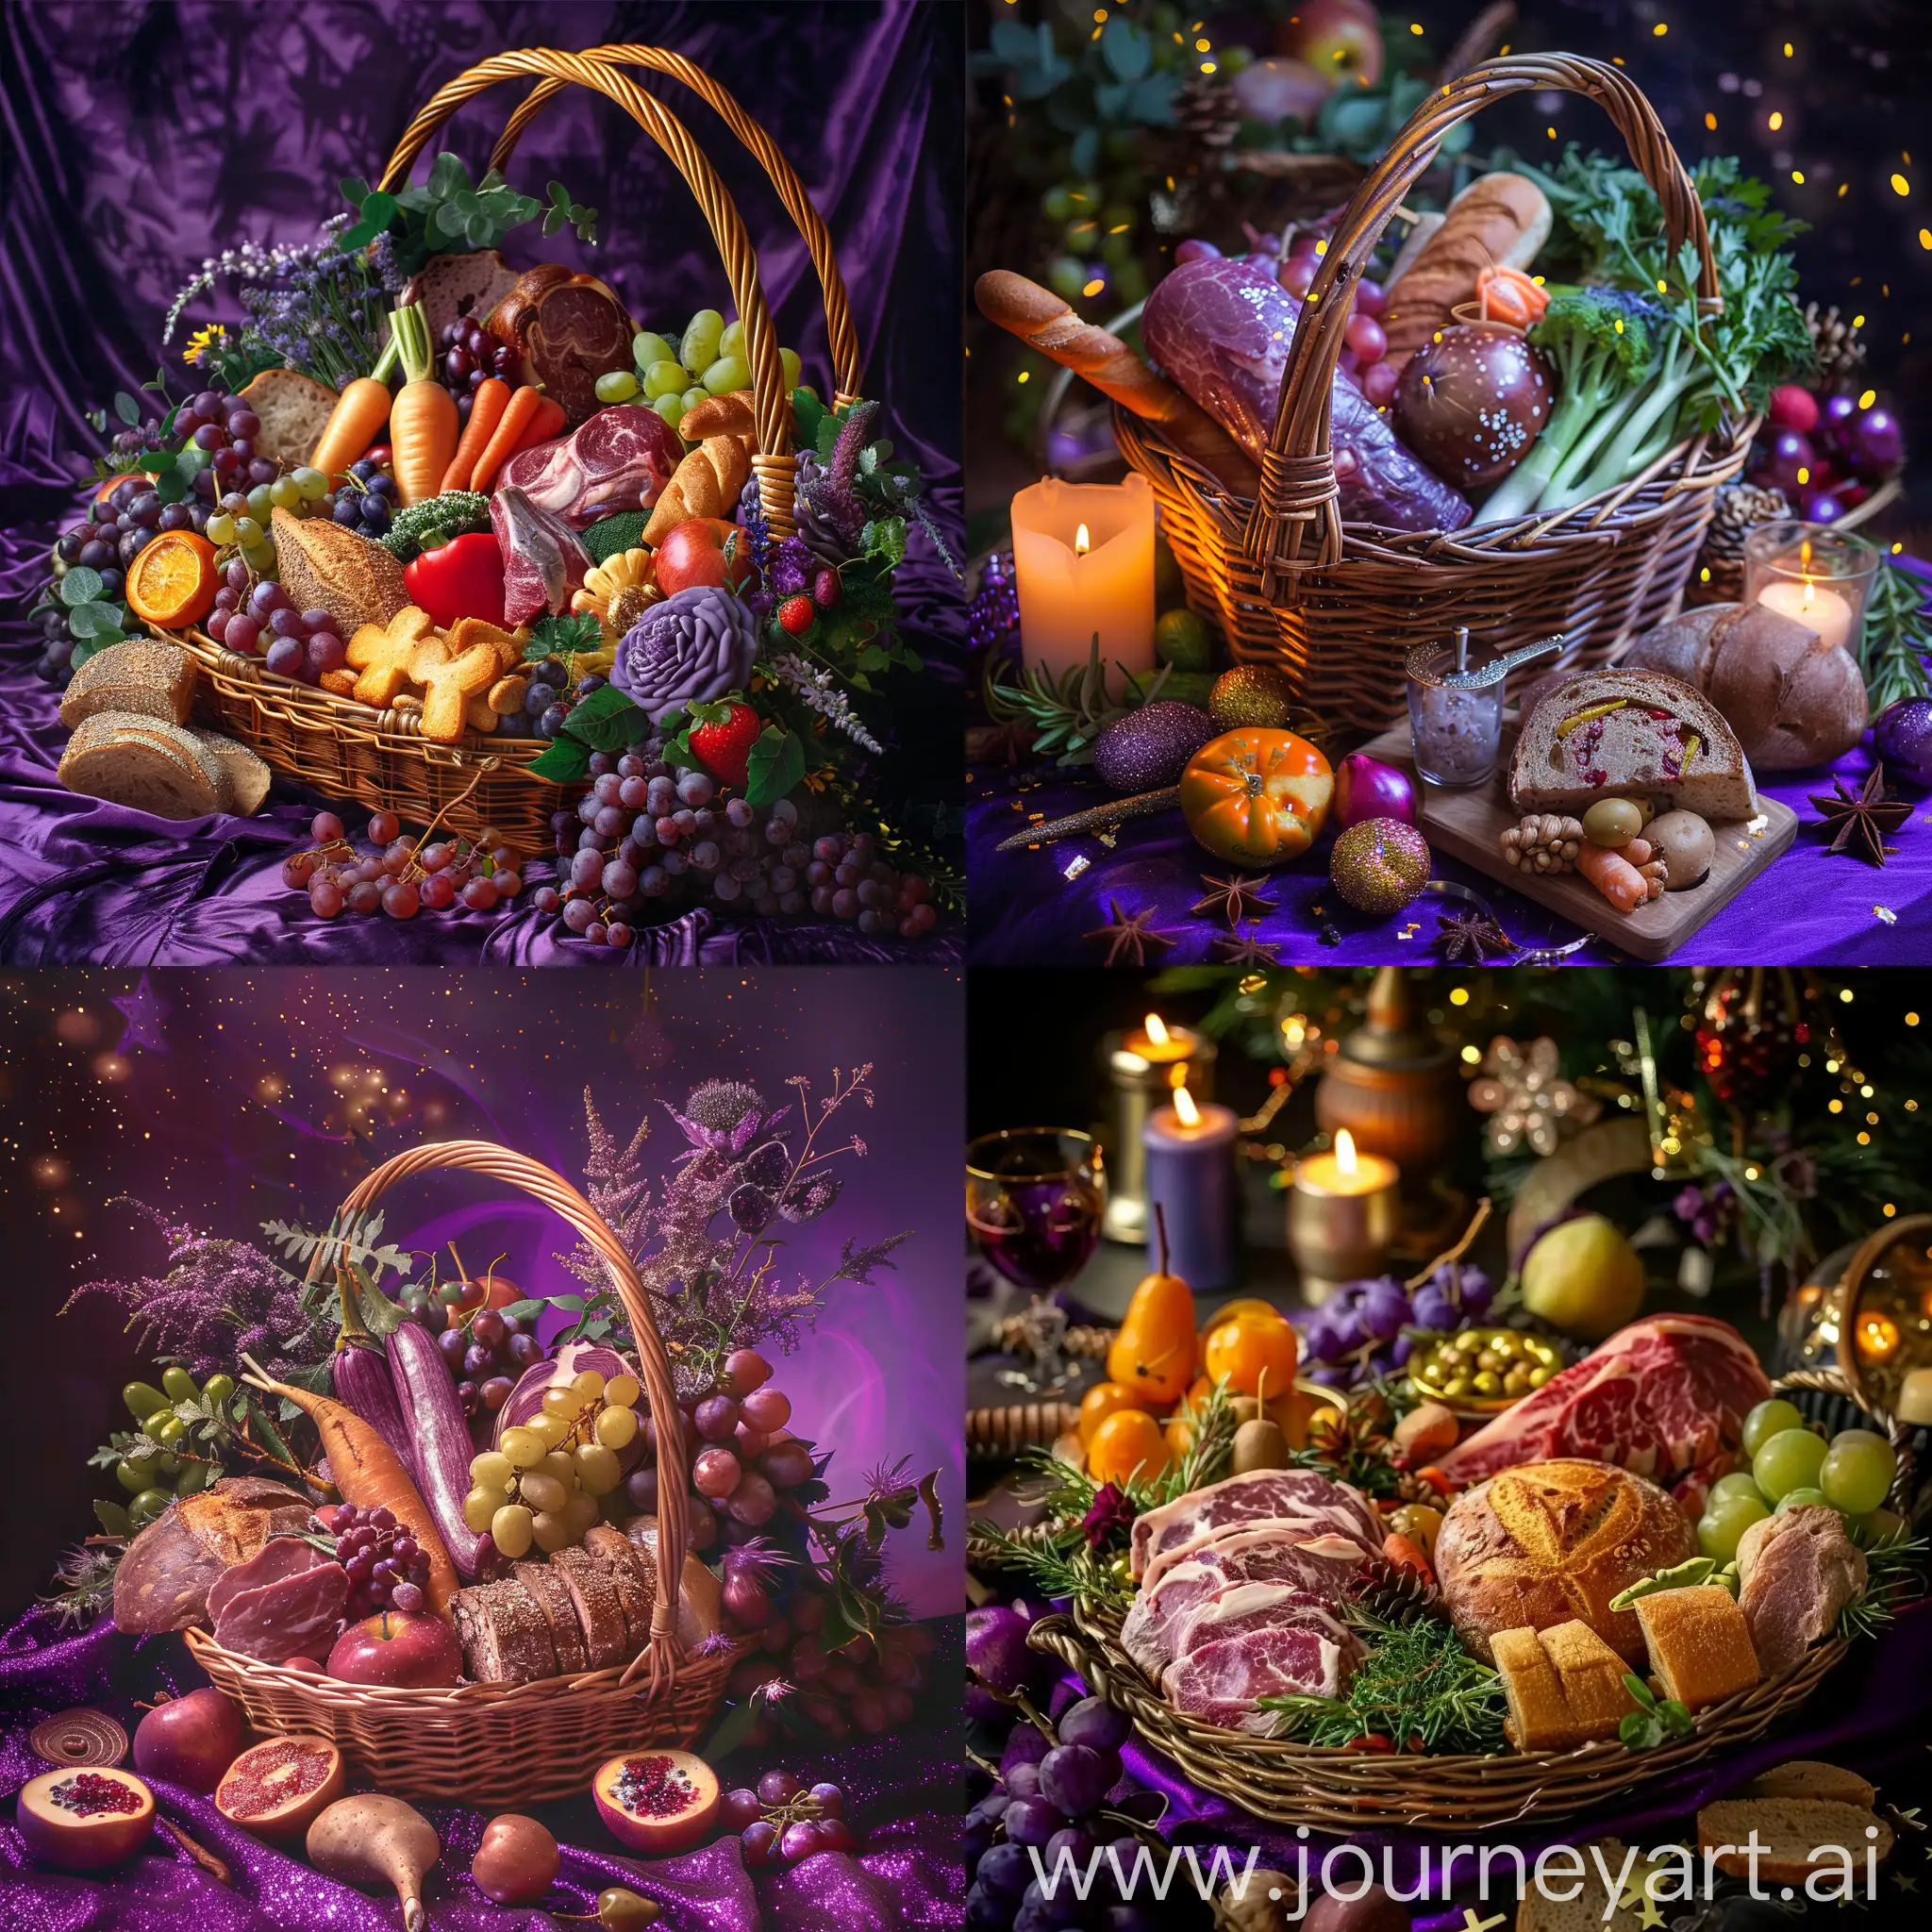 With the purple theme, create a magical golden, beautiful, and sparkling mystery food basket with meat, bread, vegetables, and fruit inside.